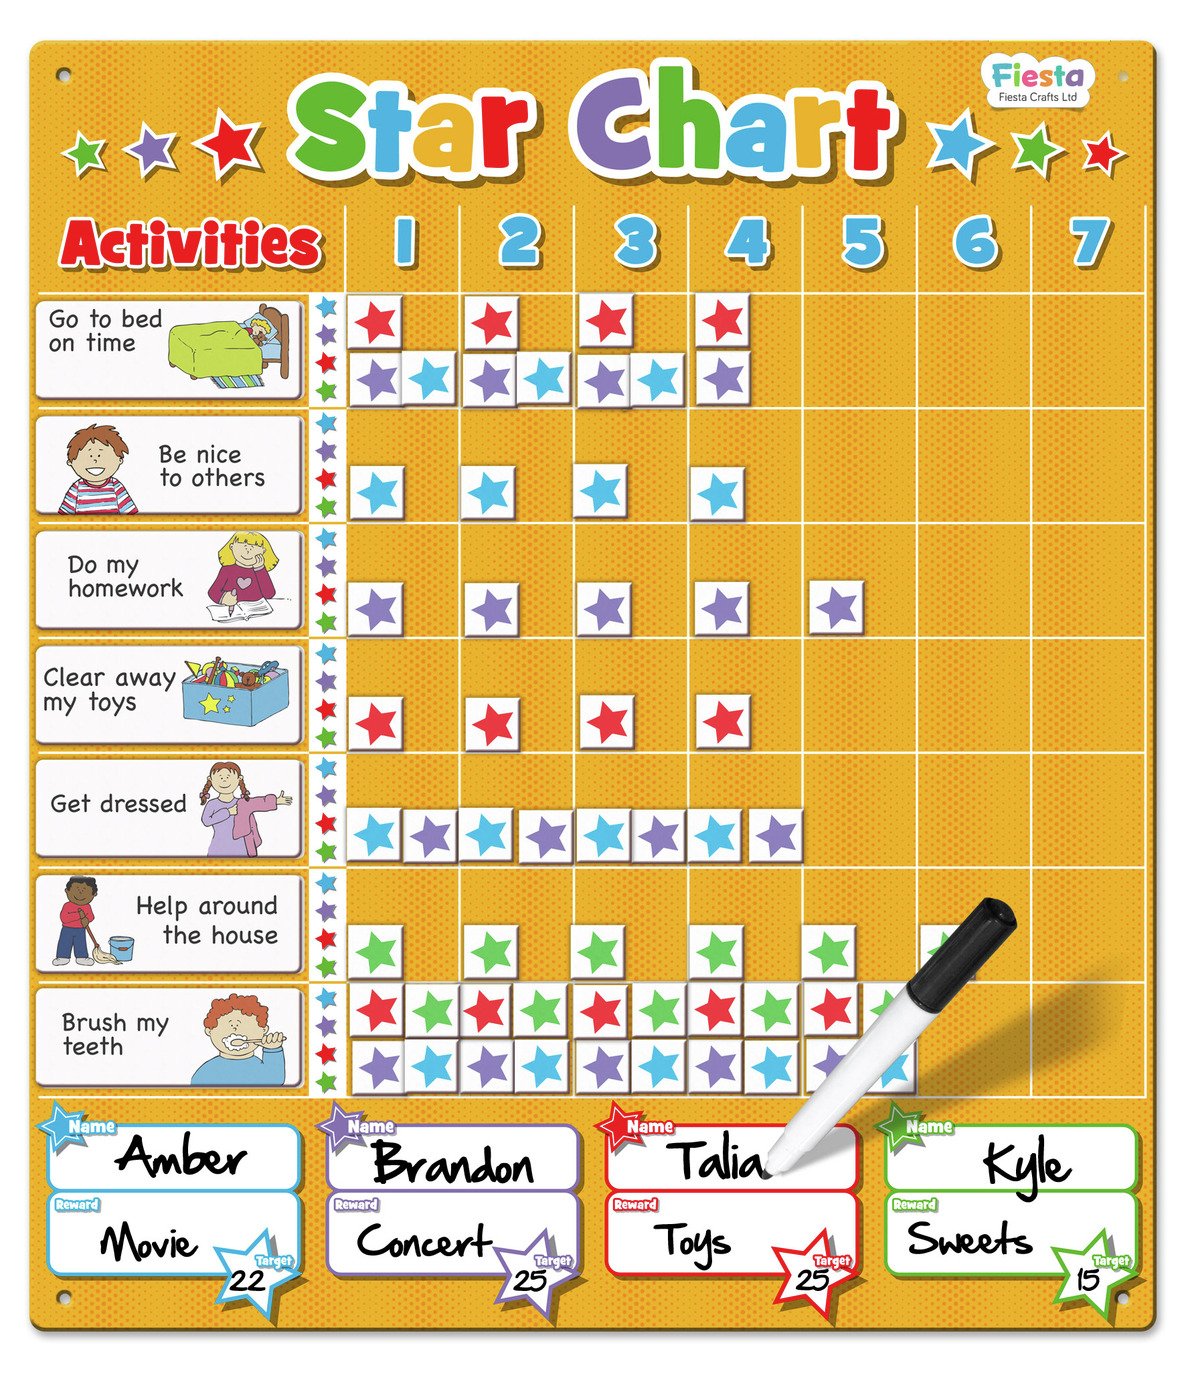 Fiesta Crafts Magnetic Star Chart